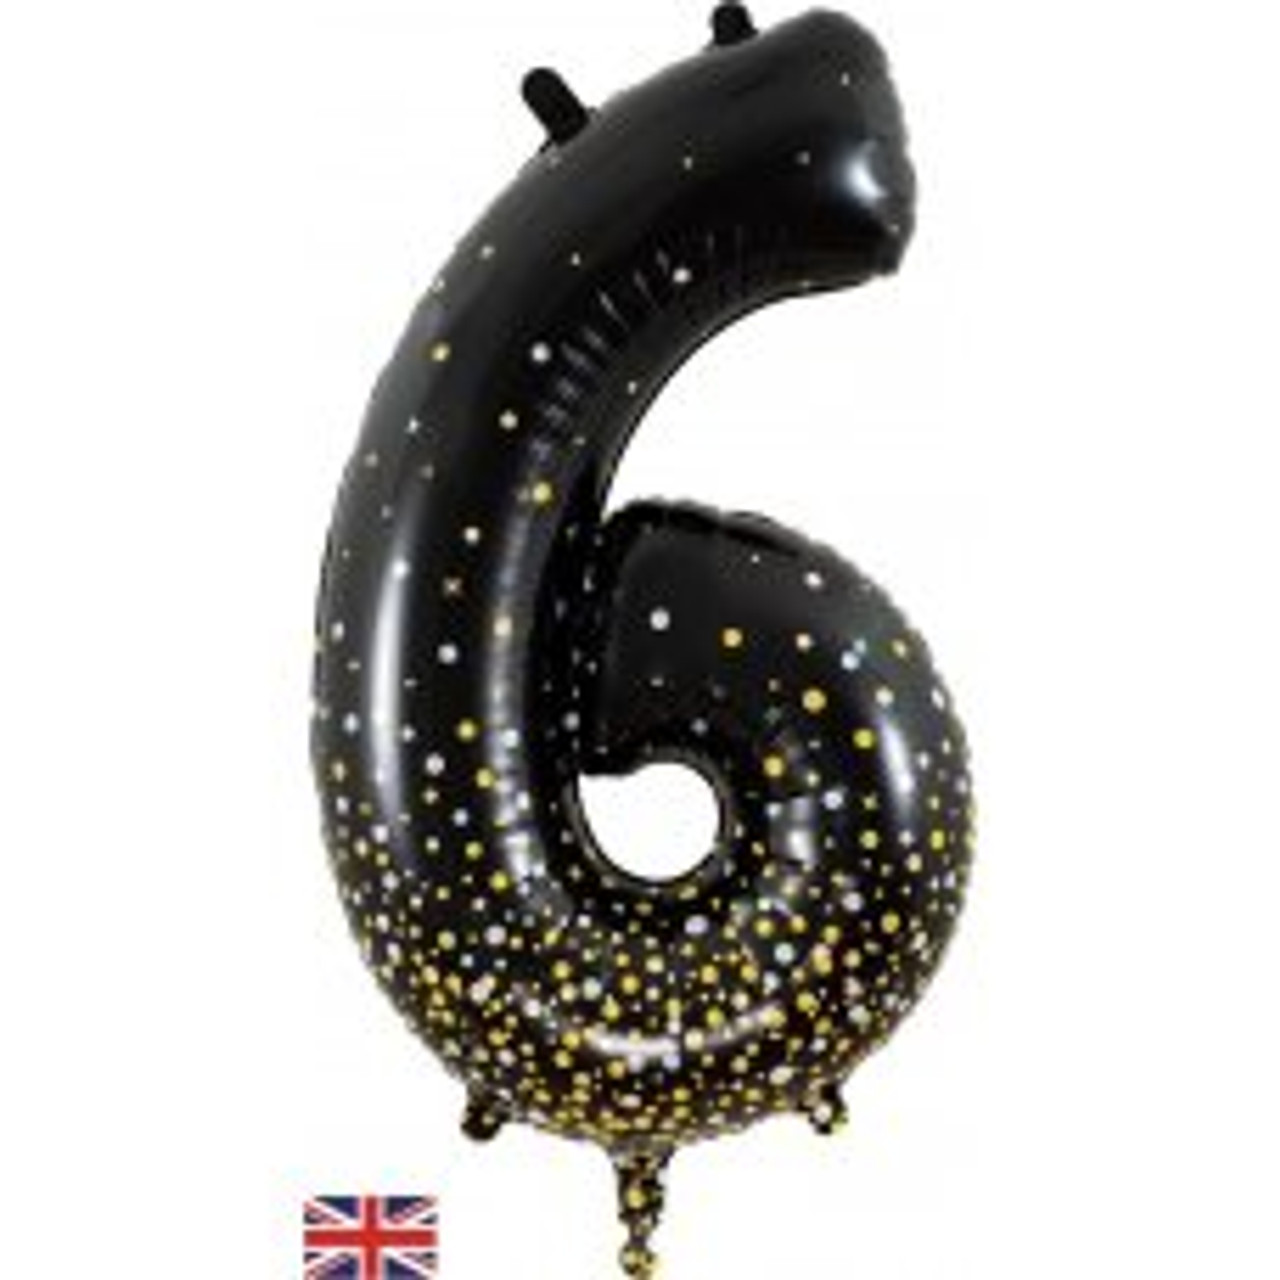 OT606968 NUMERAL SPARKLING FIZZ BLACK GOLD 6 FOIL BALLOON 87CM/34". HELIUM INFLATED, RIBBON AND WEIGHT